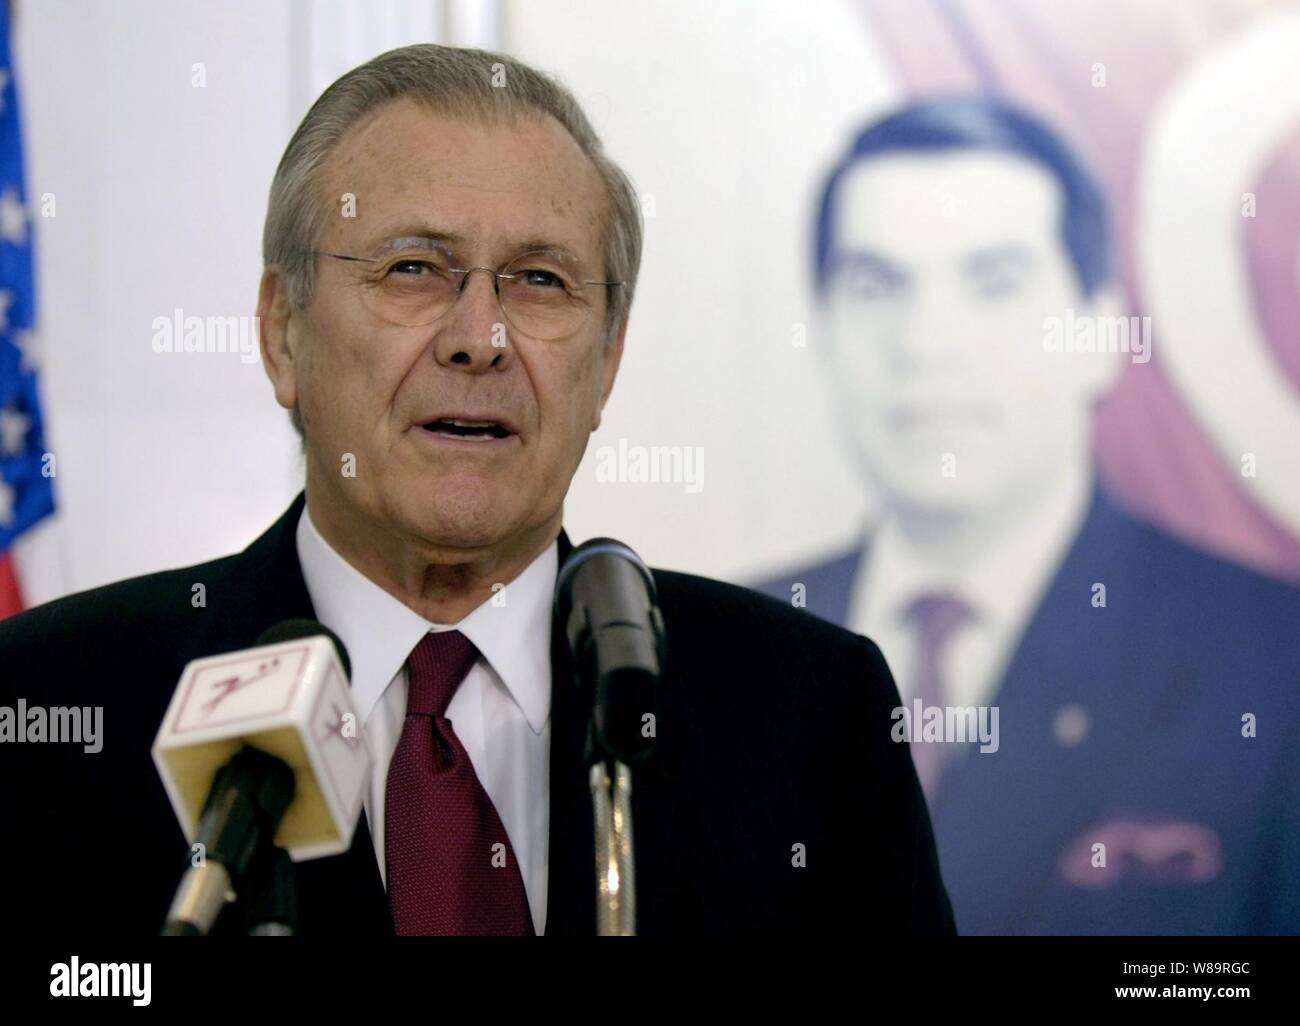 Secretary of Defense Donald H. Rumsfeld speaks to the press during a joint media availability with Tunisian Minister of National Defense Kamel Morjane in Tunis, Tunisia, on Feb. 11, 2006.  Rumsfeld met with delegations from the Mediterranean Dialogue countries of Algeria, Egypt, Israel, Jordan, Mauritania, Morocco and Tunisia earlier at the NATO Ministerial in Taormina, Sicily.  Rumsfeld is in Tunisia for bi-lateral meetings with his counterparts to continue those talks and discuss regional security issues. Stock Photo